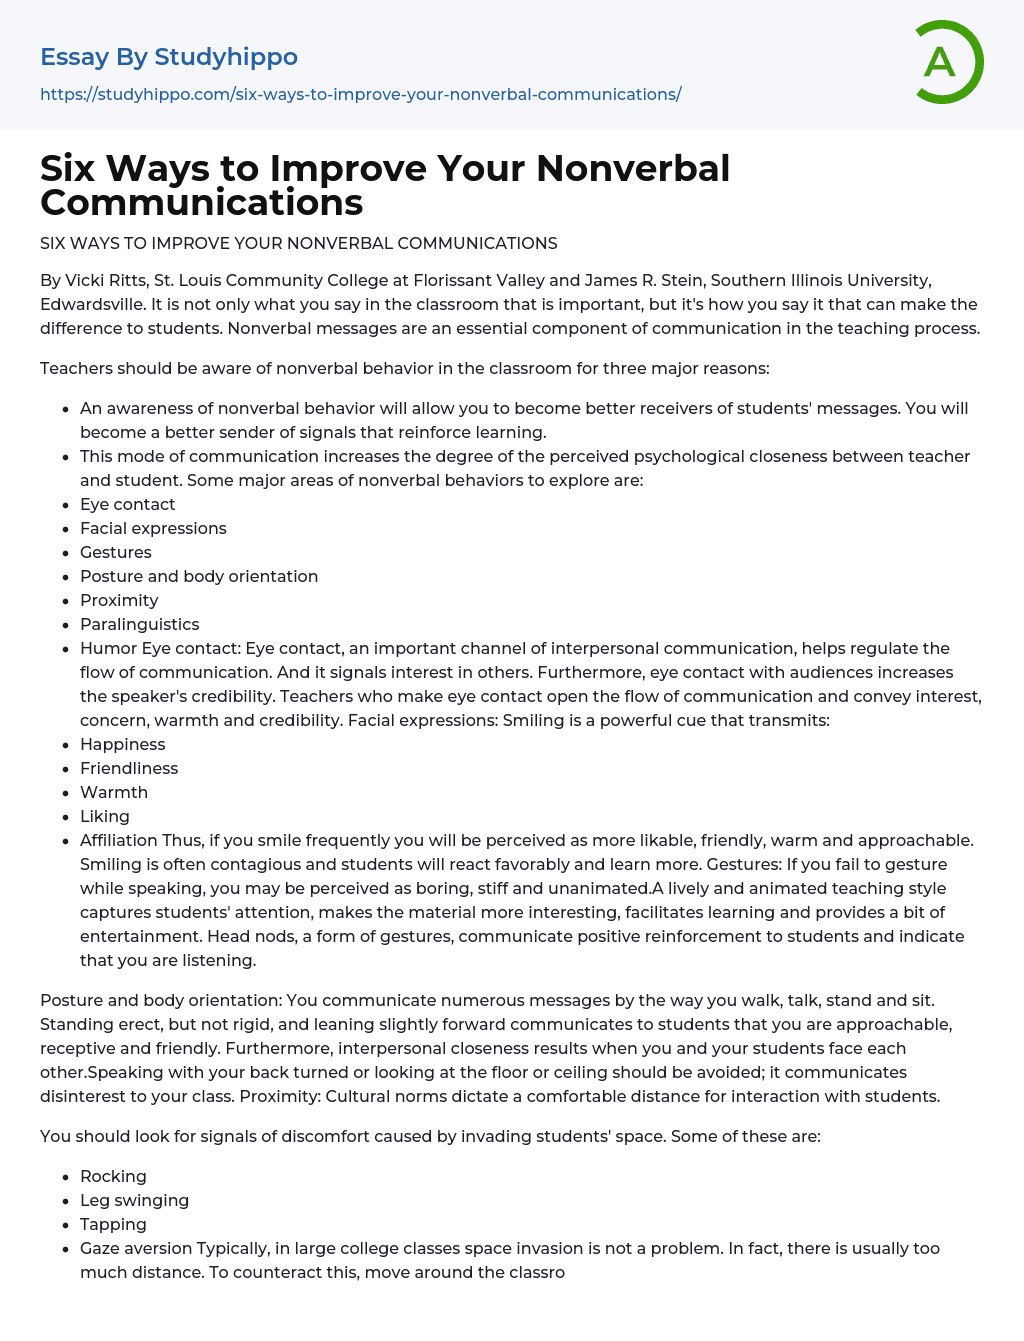 how to improve nonverbal communication essay